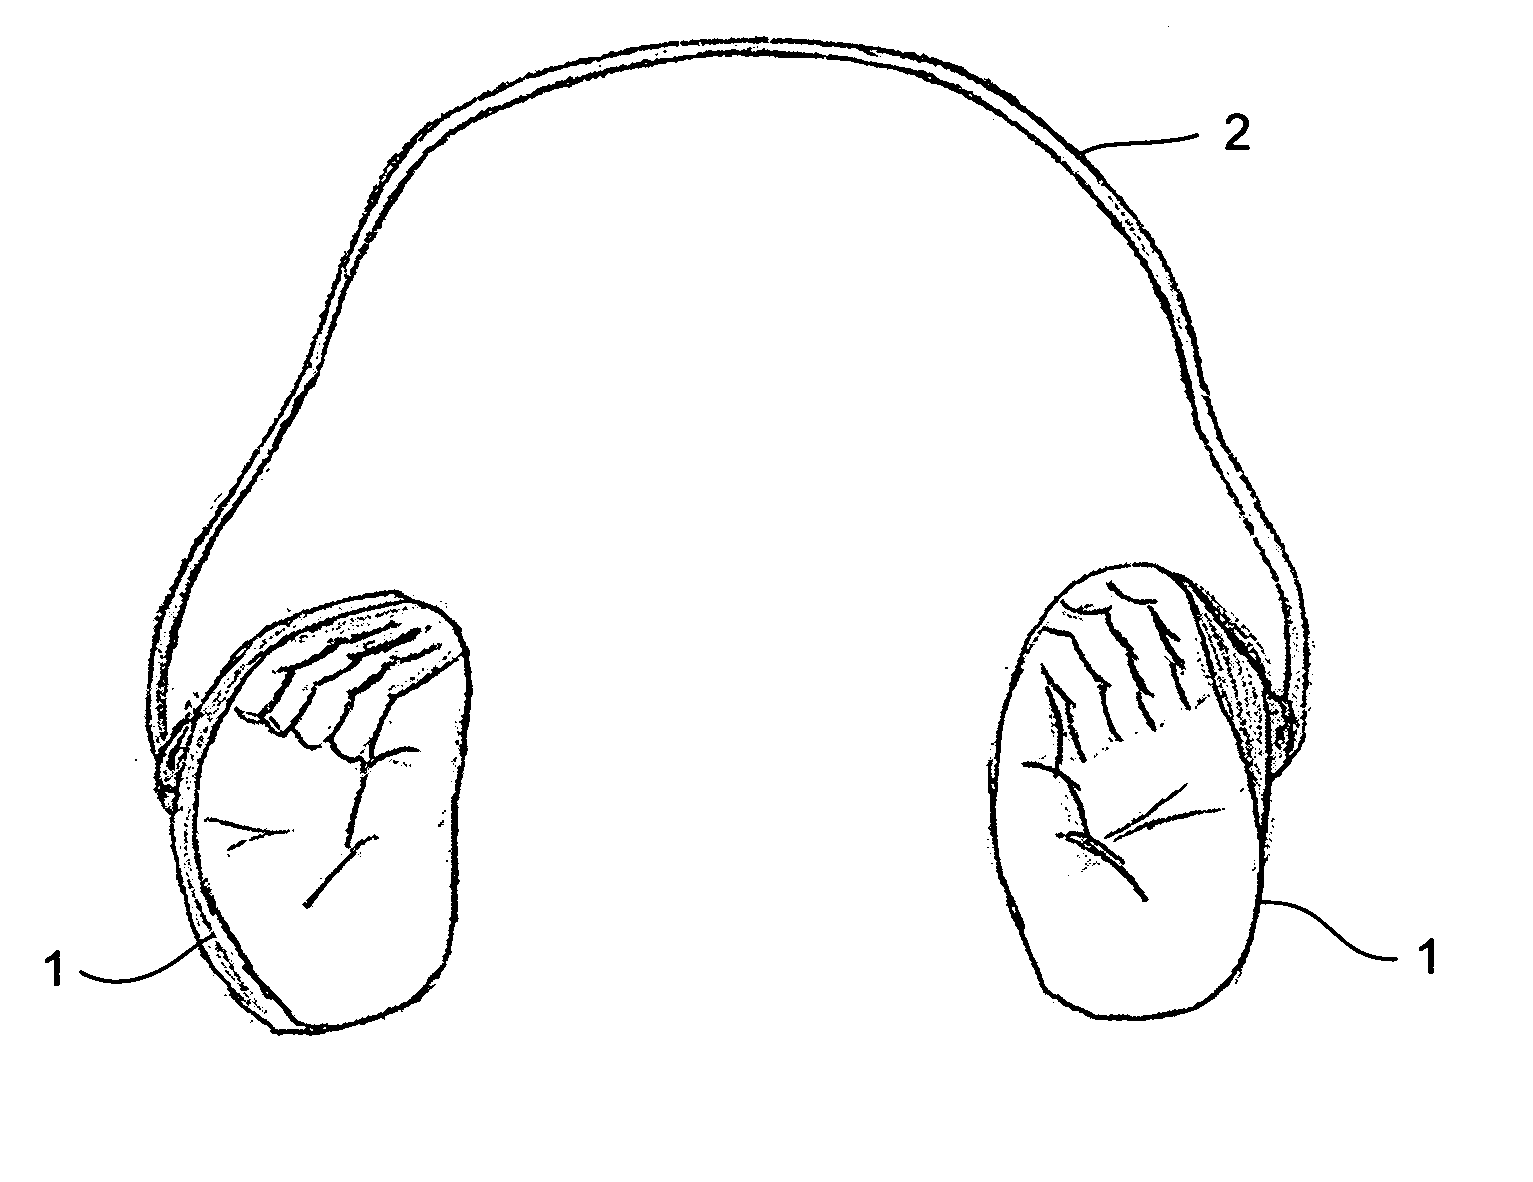 Enhancing audio reinforcement systems and methods